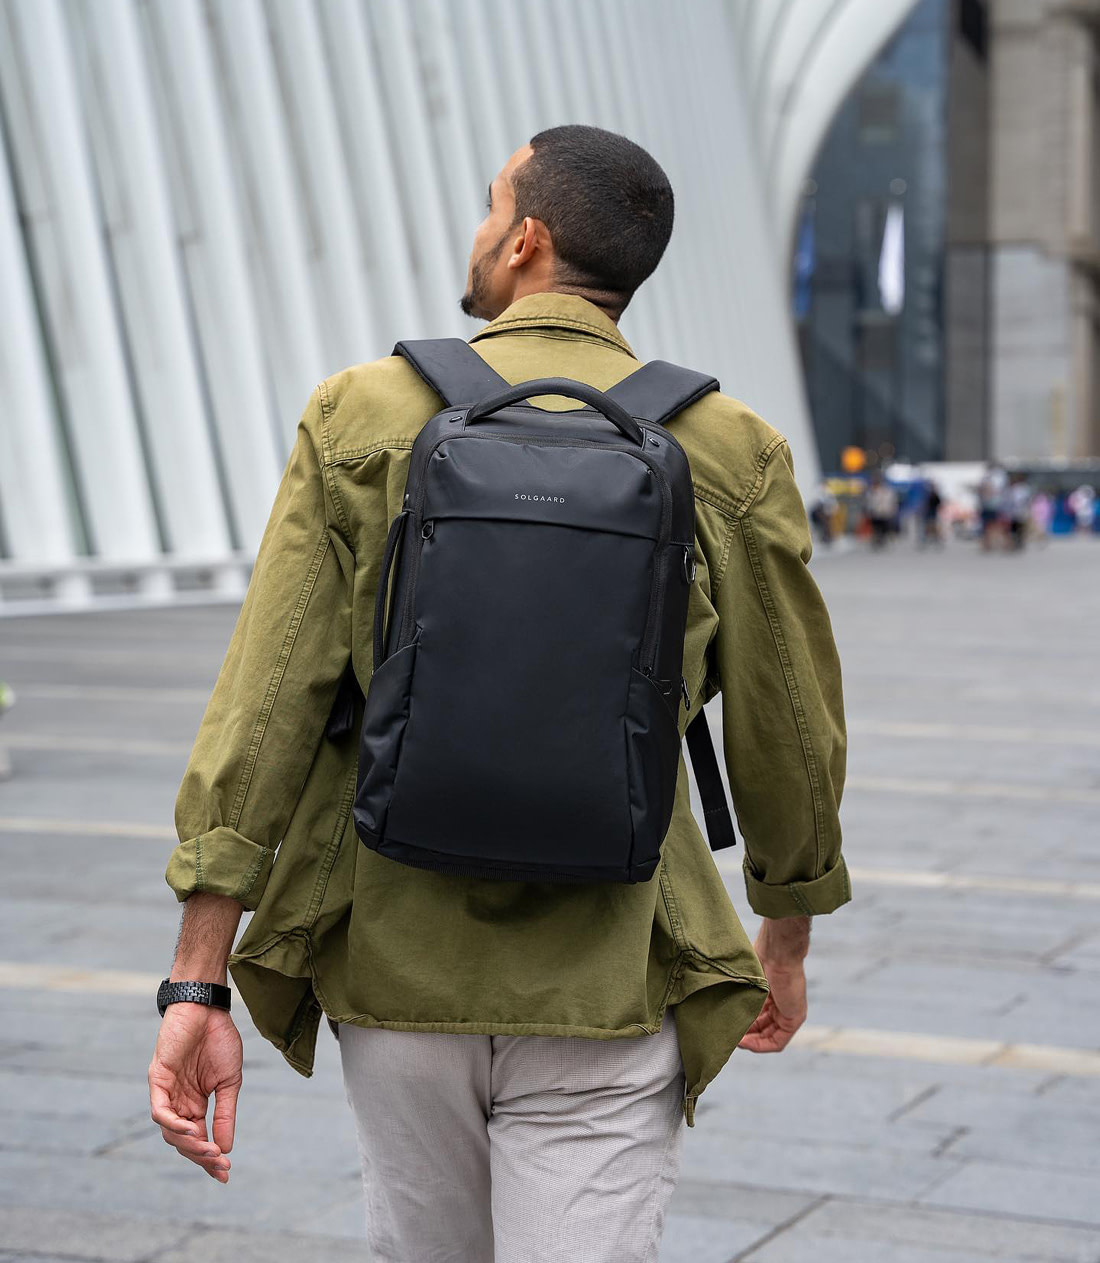 A clever travel backpack